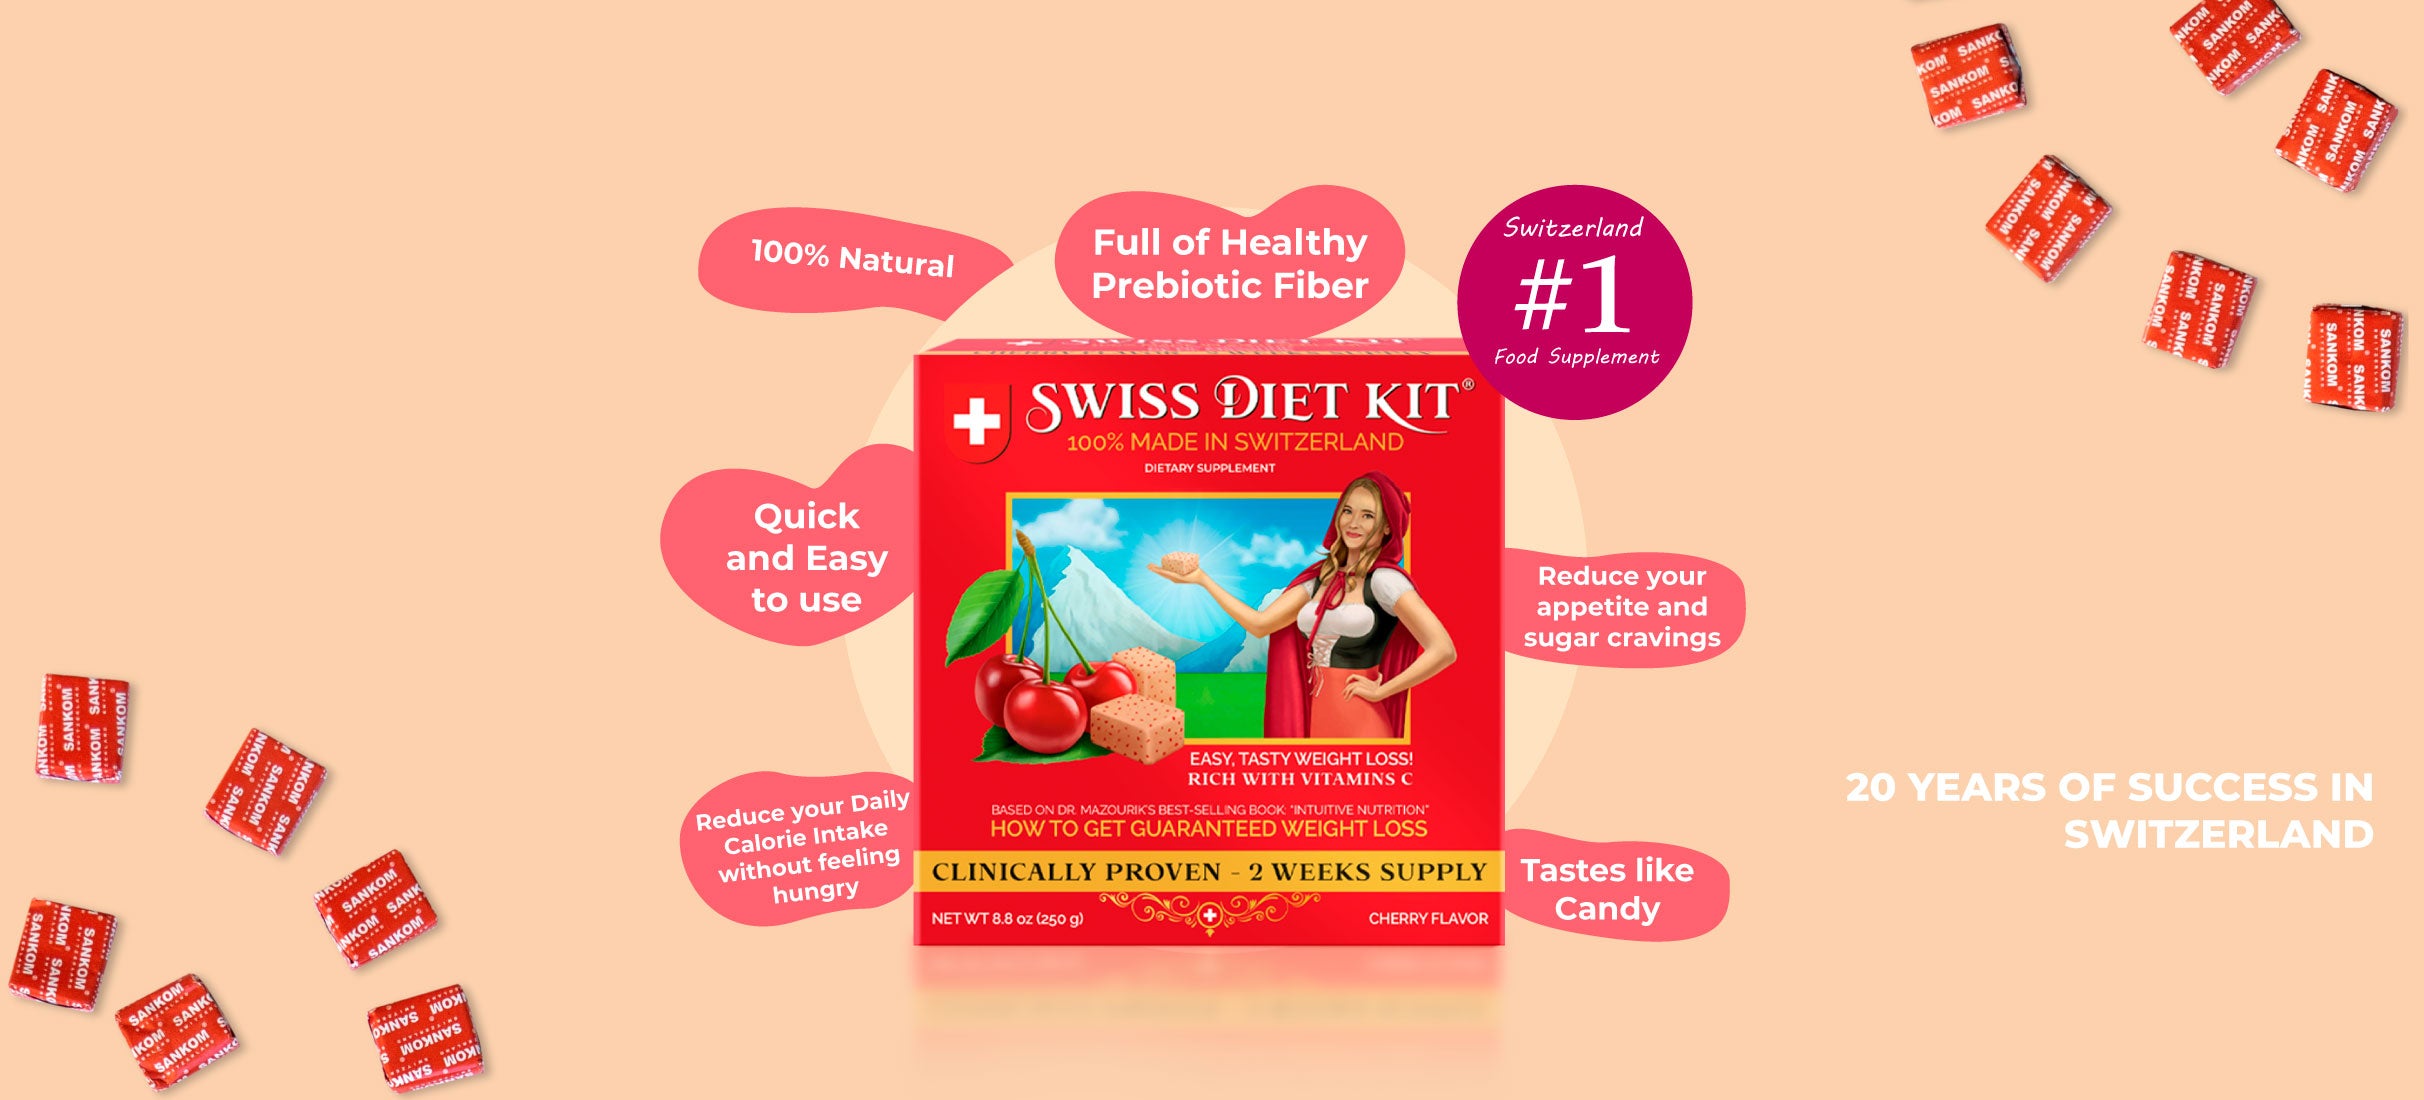 Products – Swiss Diet Kit by Dr. Mazourik